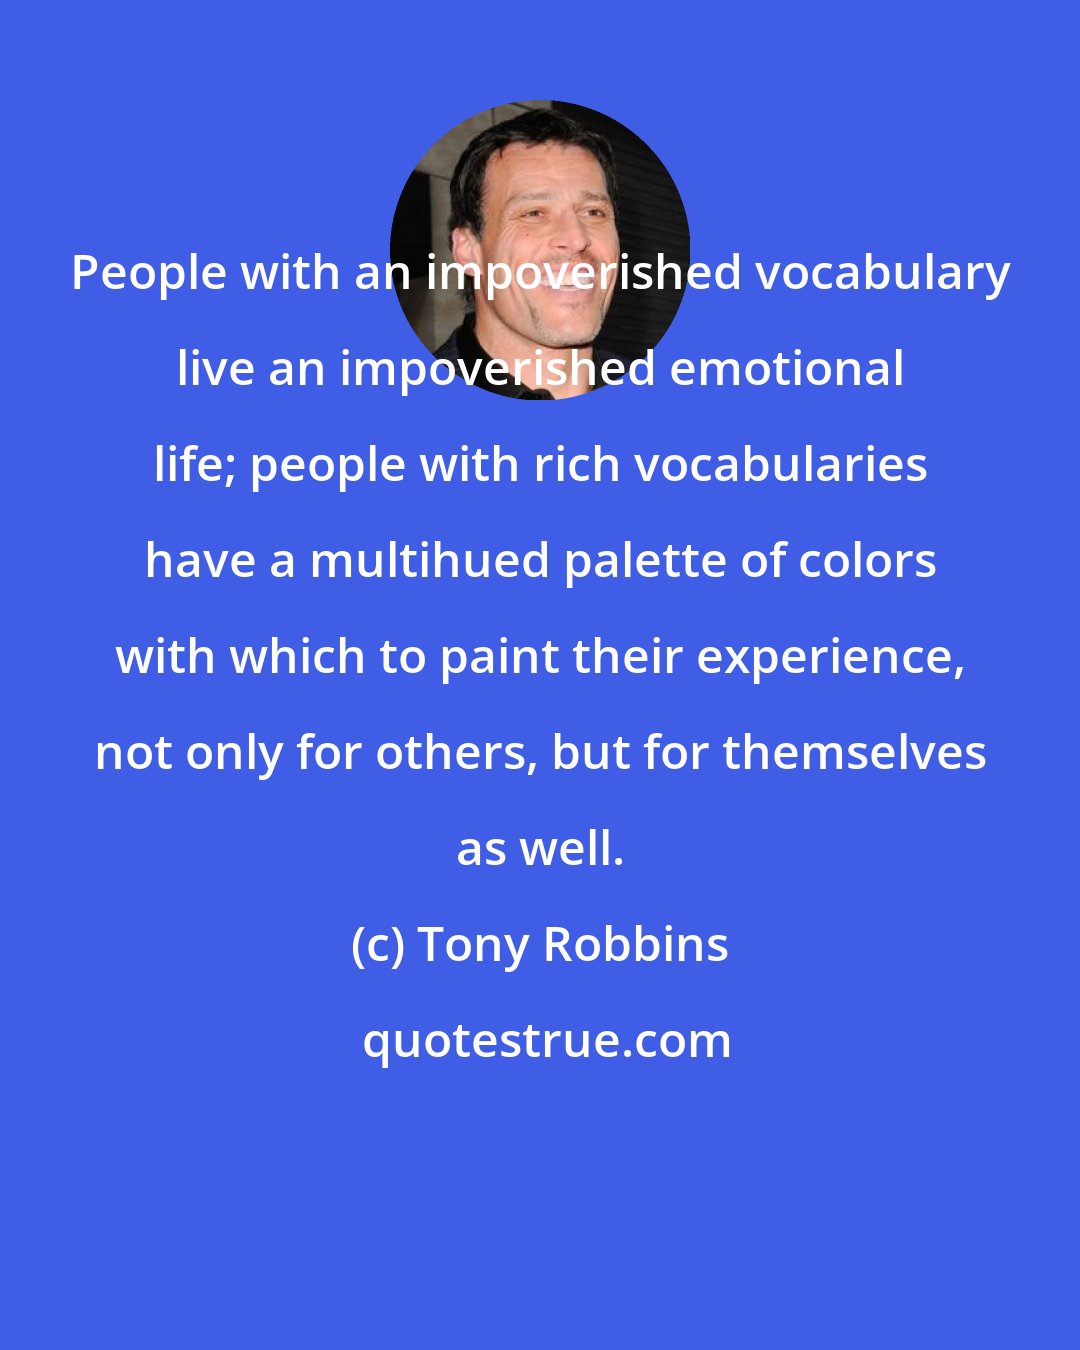 Tony Robbins: People with an impoverished vocabulary live an impoverished emotional life; people with rich vocabularies have a multihued palette of colors with which to paint their experience, not only for others, but for themselves as well.